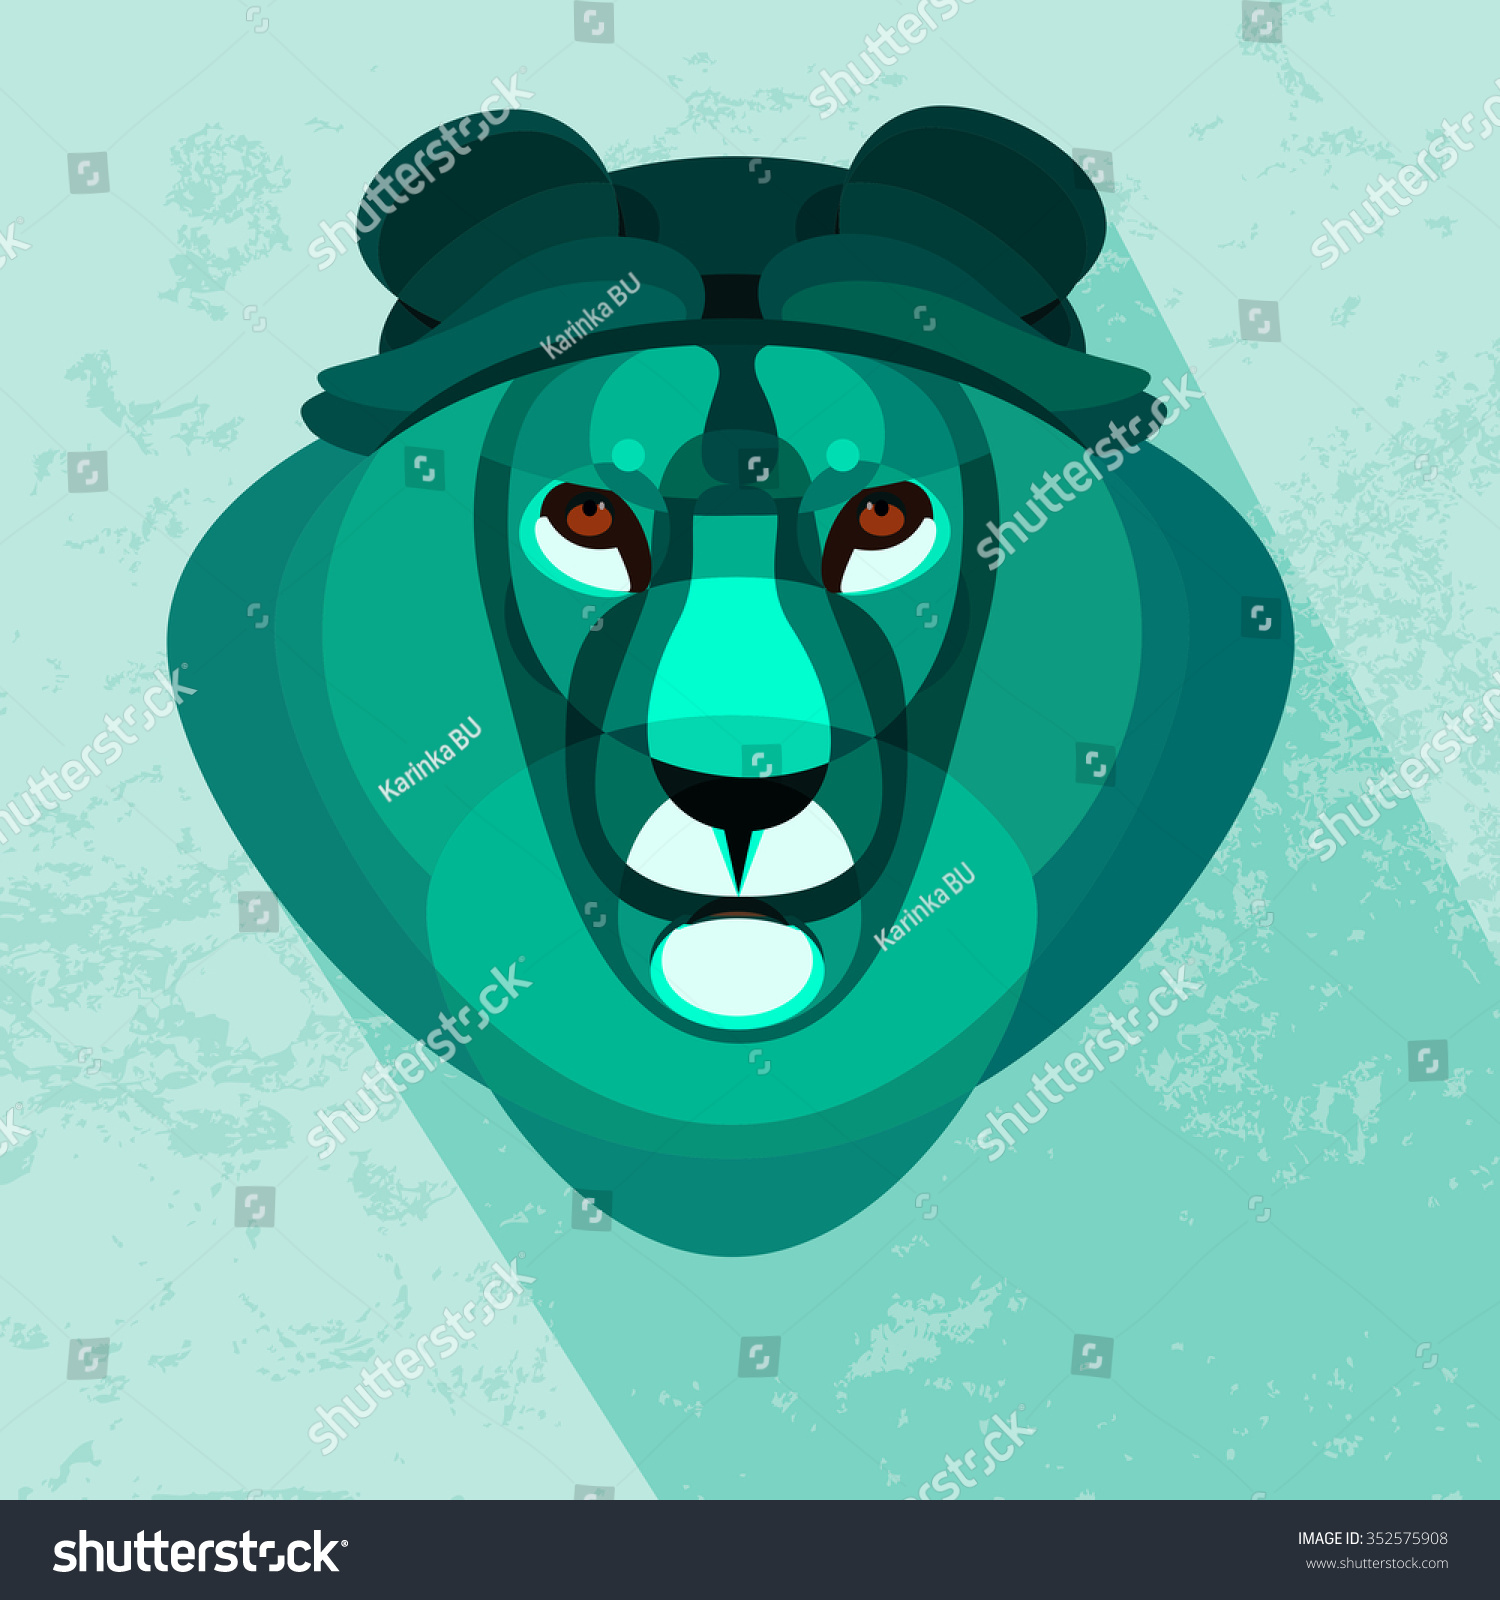 Lion Head Lion Portrait Abstract Low Stock Vector Royalty Free 352575908 Shutterstock 7751